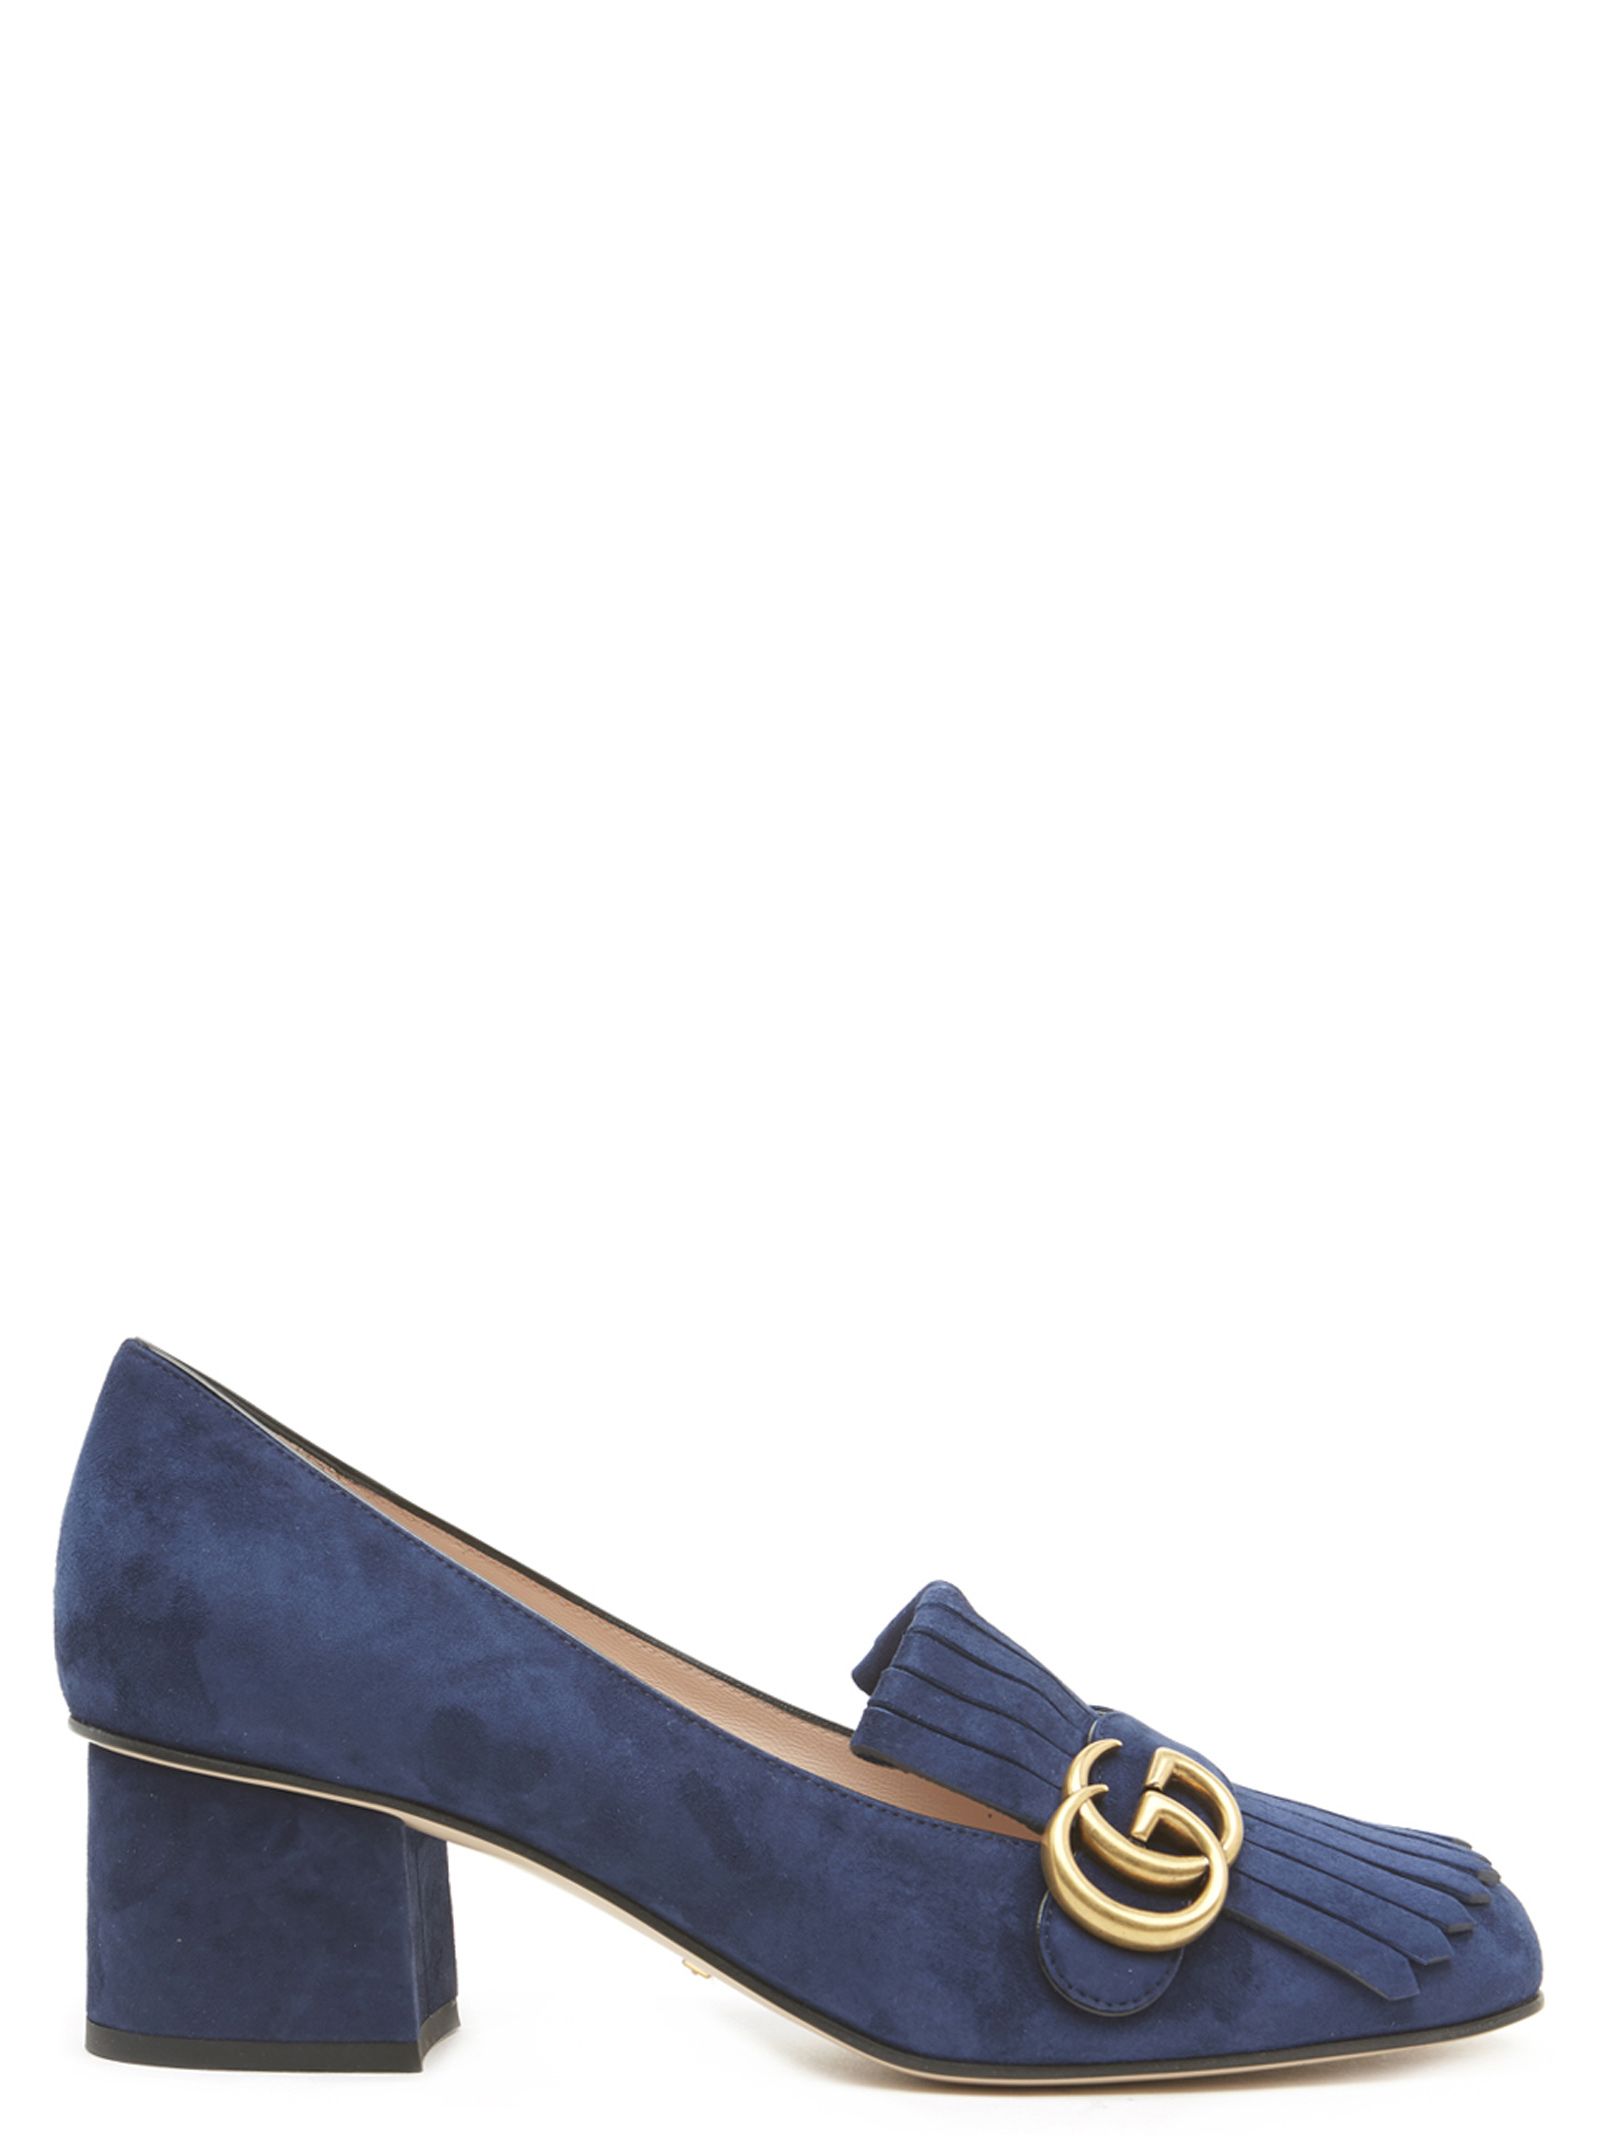 Gucci Gucci 'marmont' Shoes Blue 10827393 italist